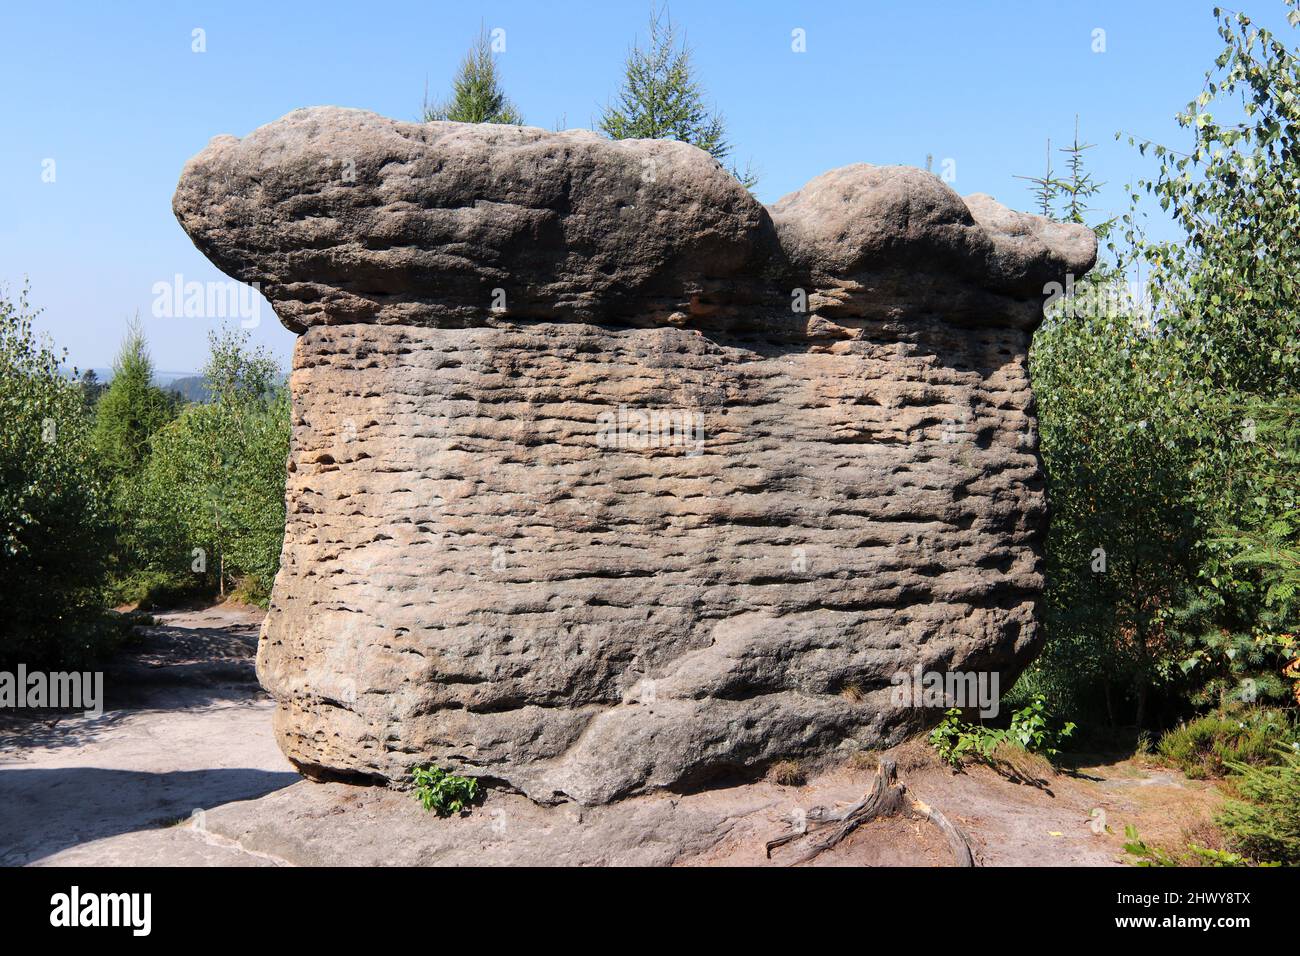 Stone Mushrooms - rock formation in Broumov Walls (Broumovske steny), mountain range and nature reserve, part of Table Mountains in Czech Republic Stock Photo